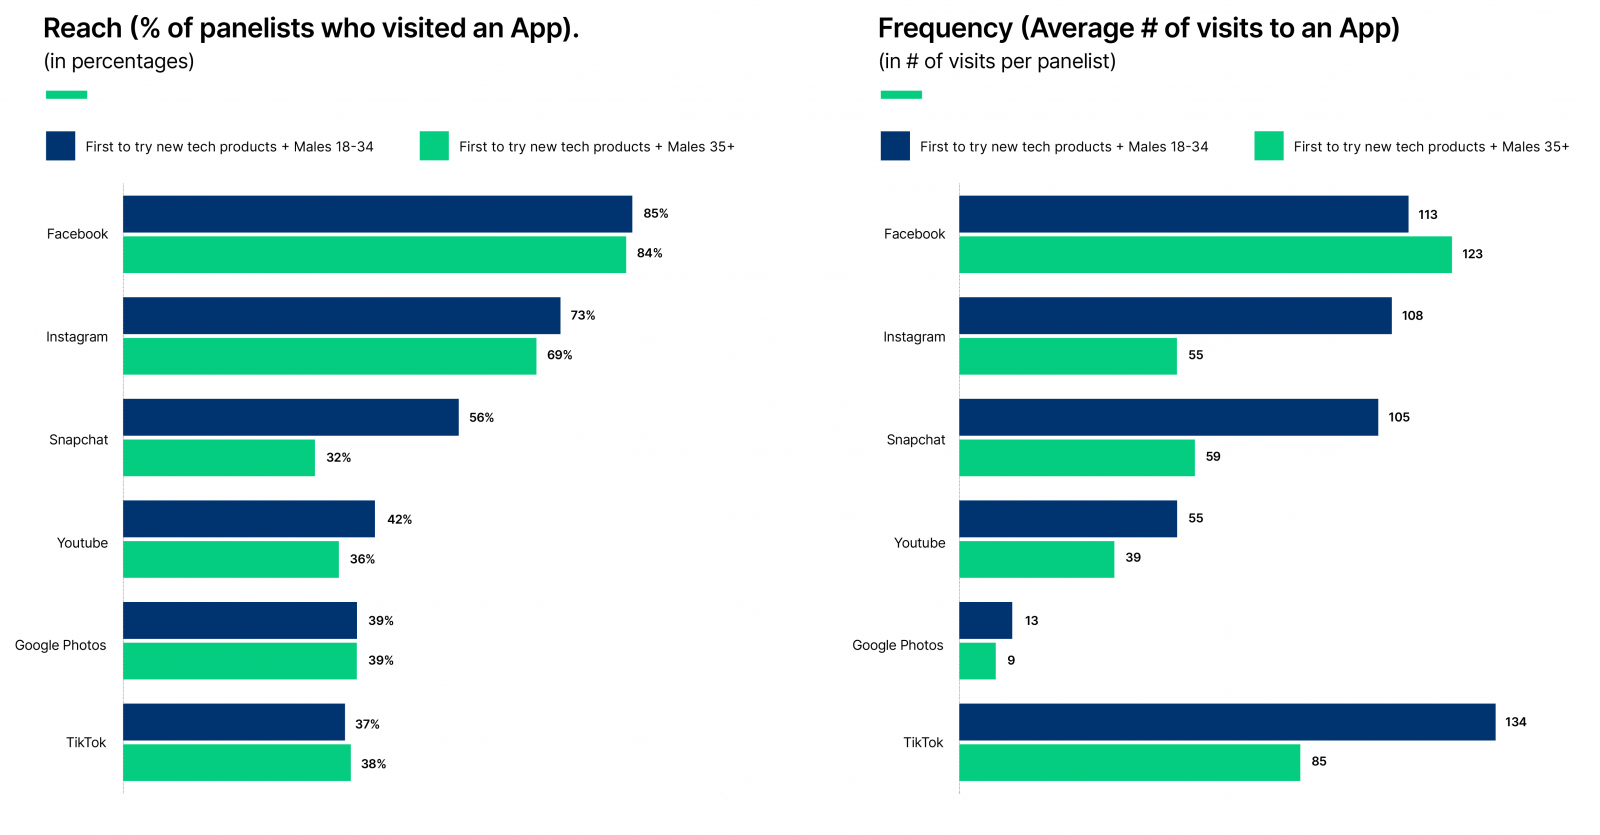 Reach and Frequency of app visits to various sites divided by male age